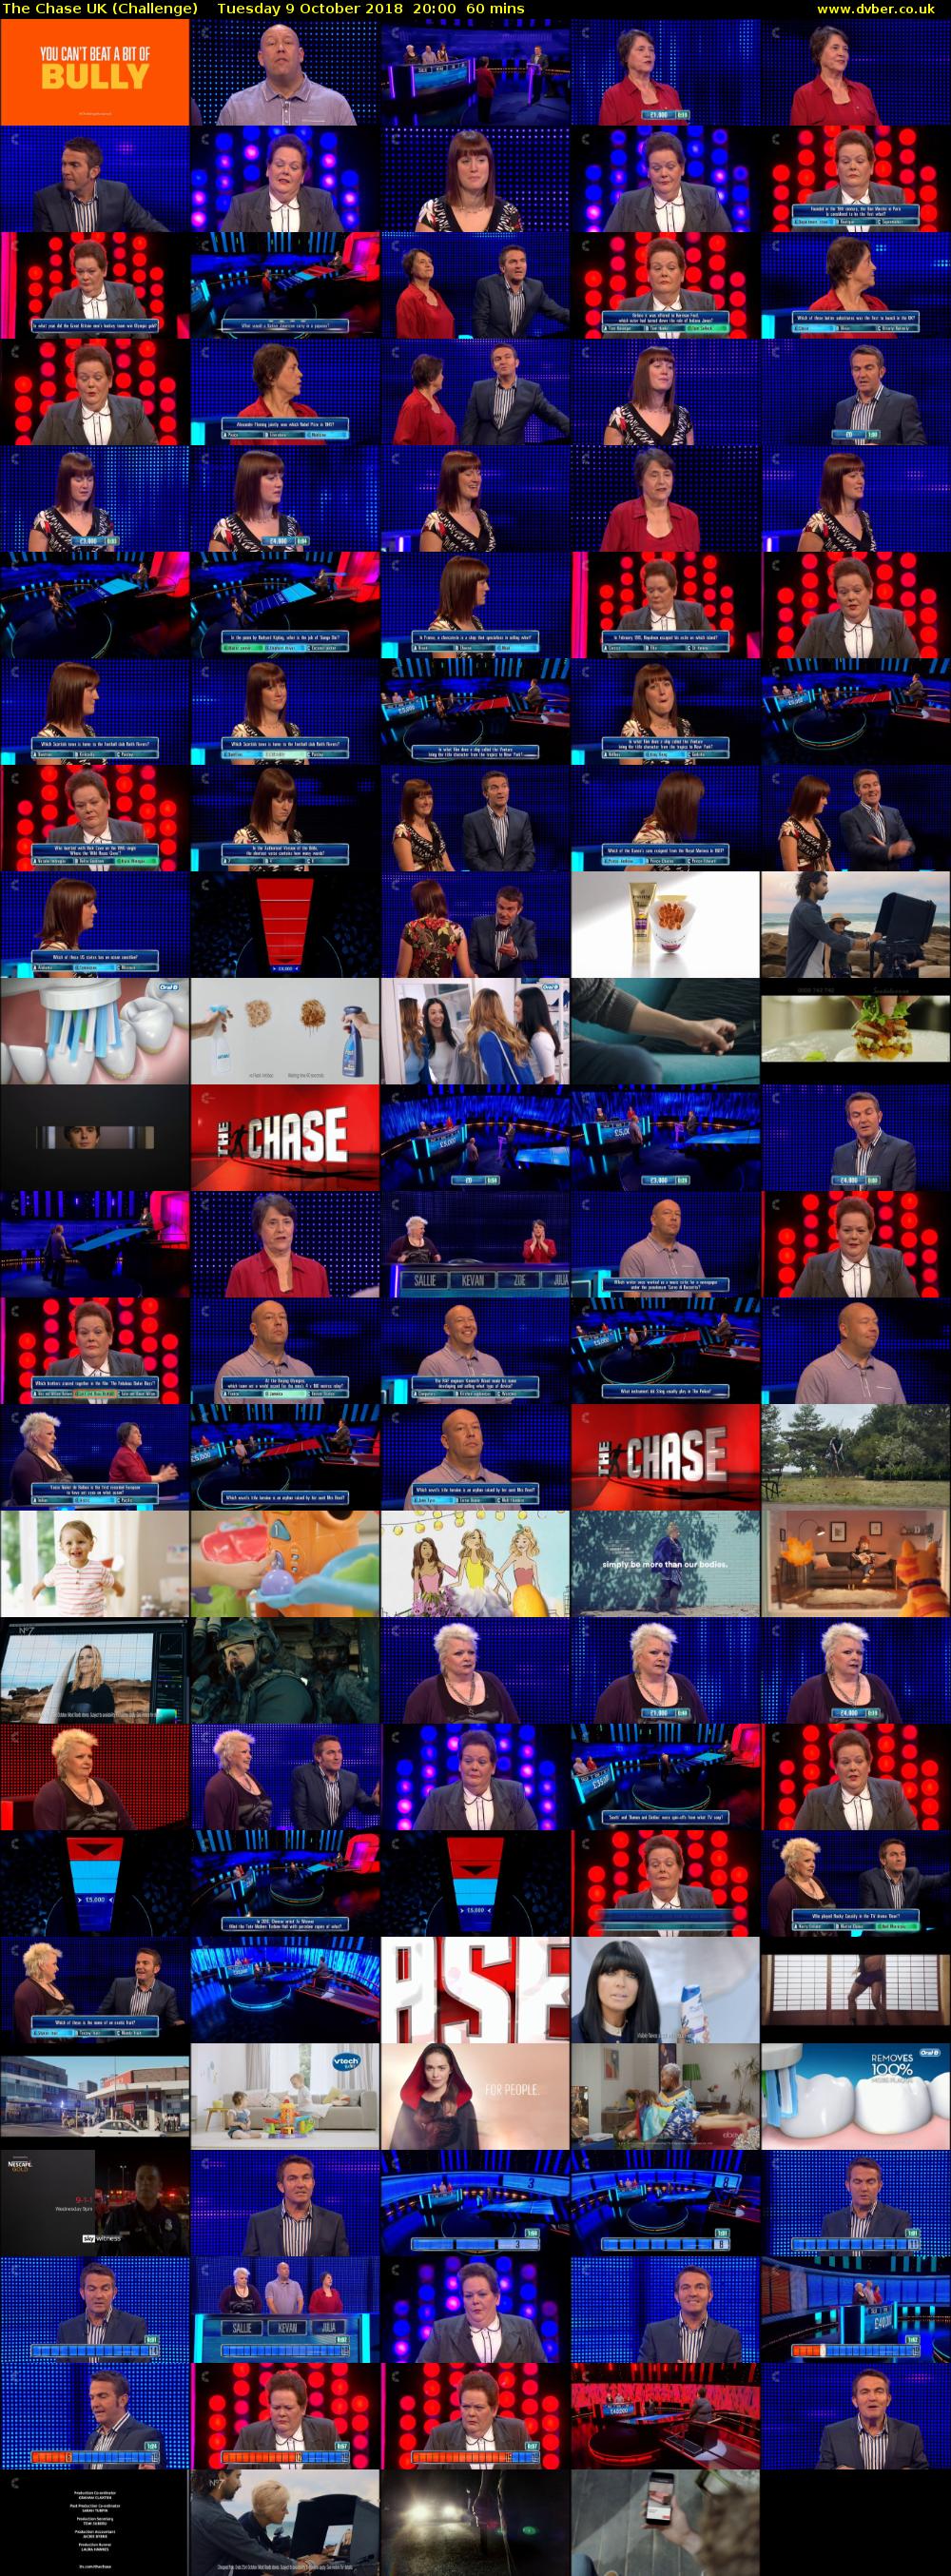 The Chase UK (Challenge) Tuesday 9 October 2018 20:00 - 21:00